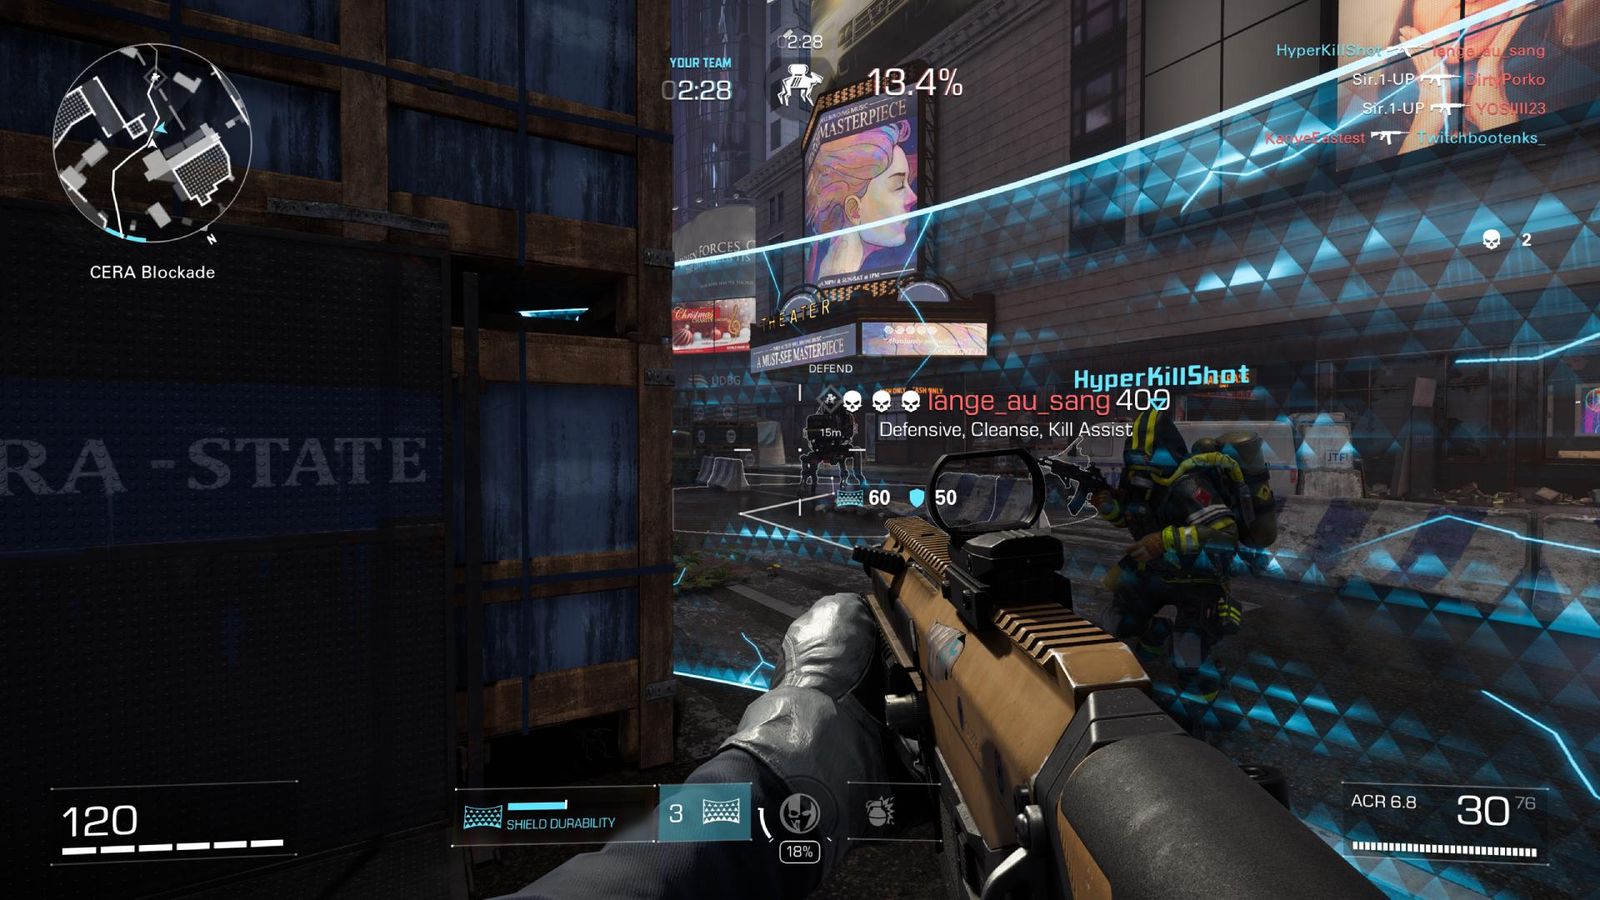 A first-person screenshot of XDefiant gameplay, showing the player holding an assault rifle and looking down a road in a city with a large blue barrier for protection.